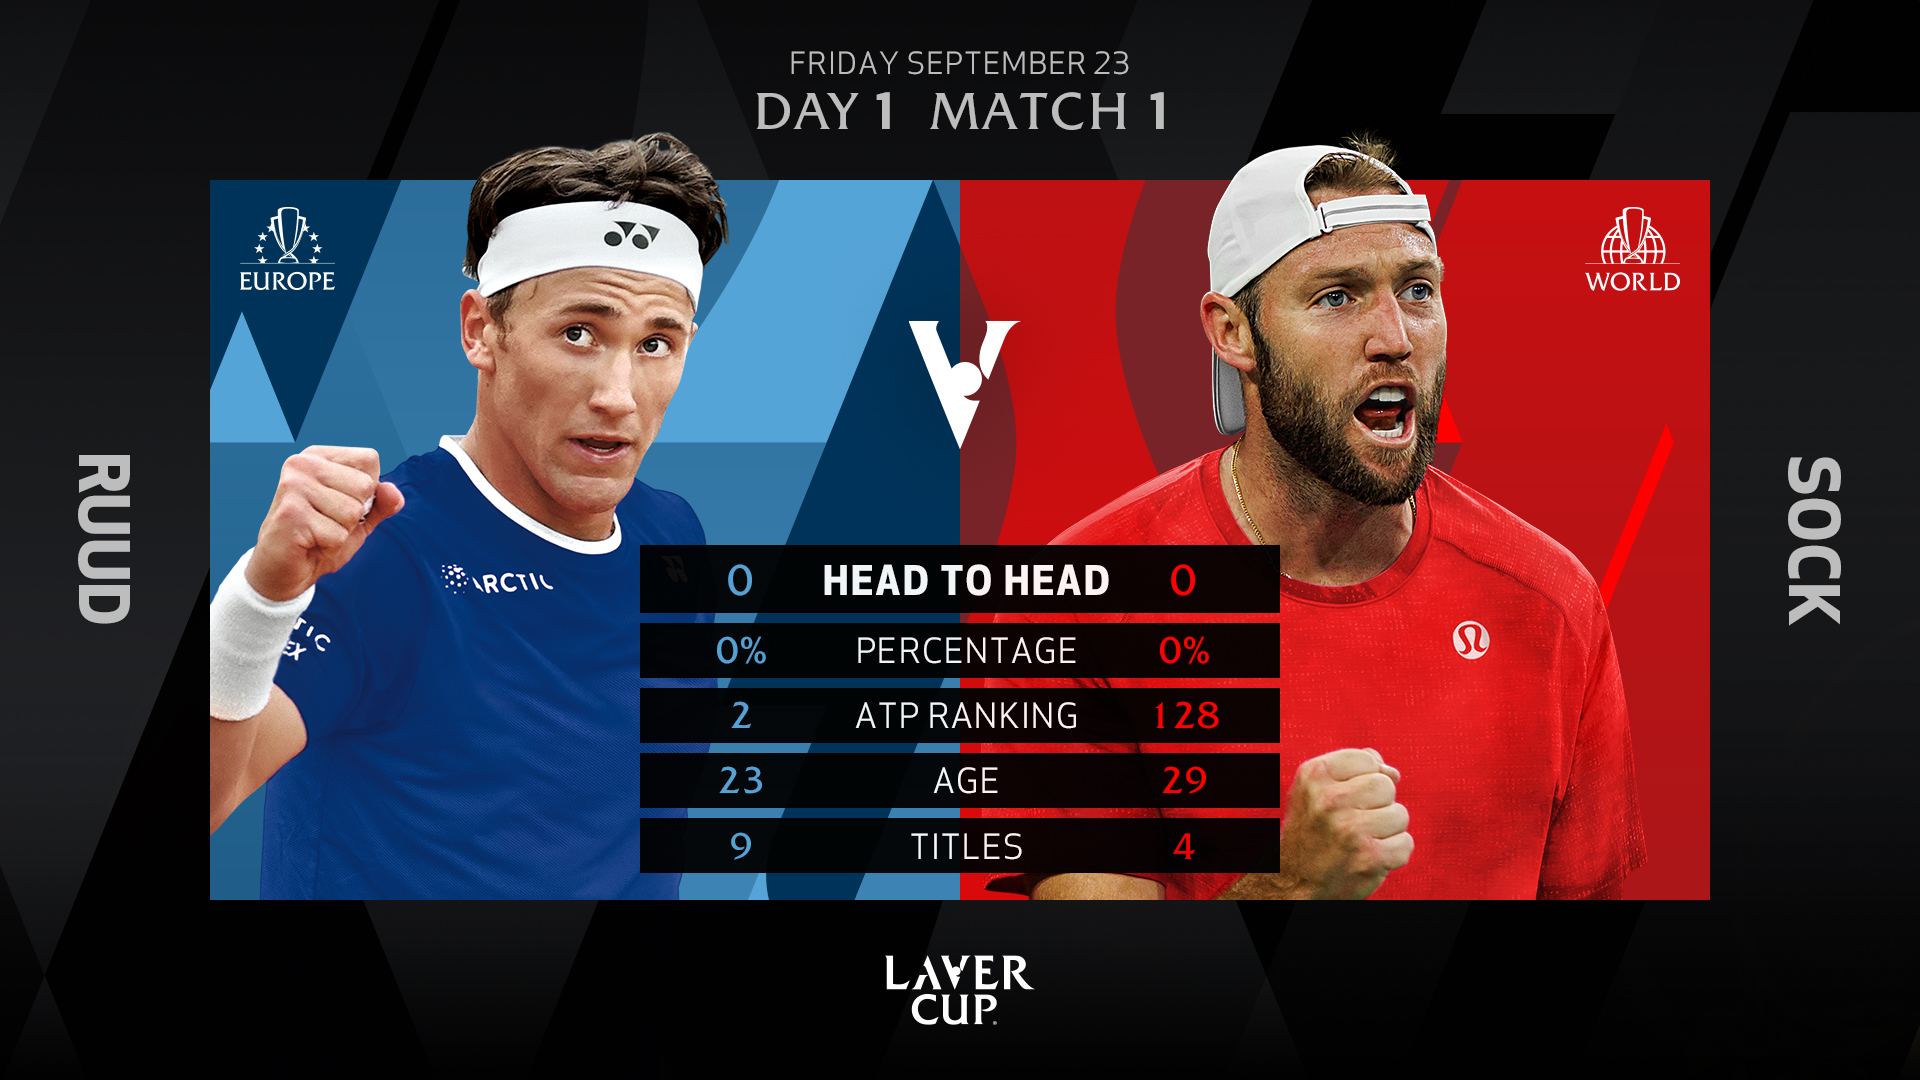 Day 1 Preview Who will clinch the first points at Laver Cup 2022? Laver Cup